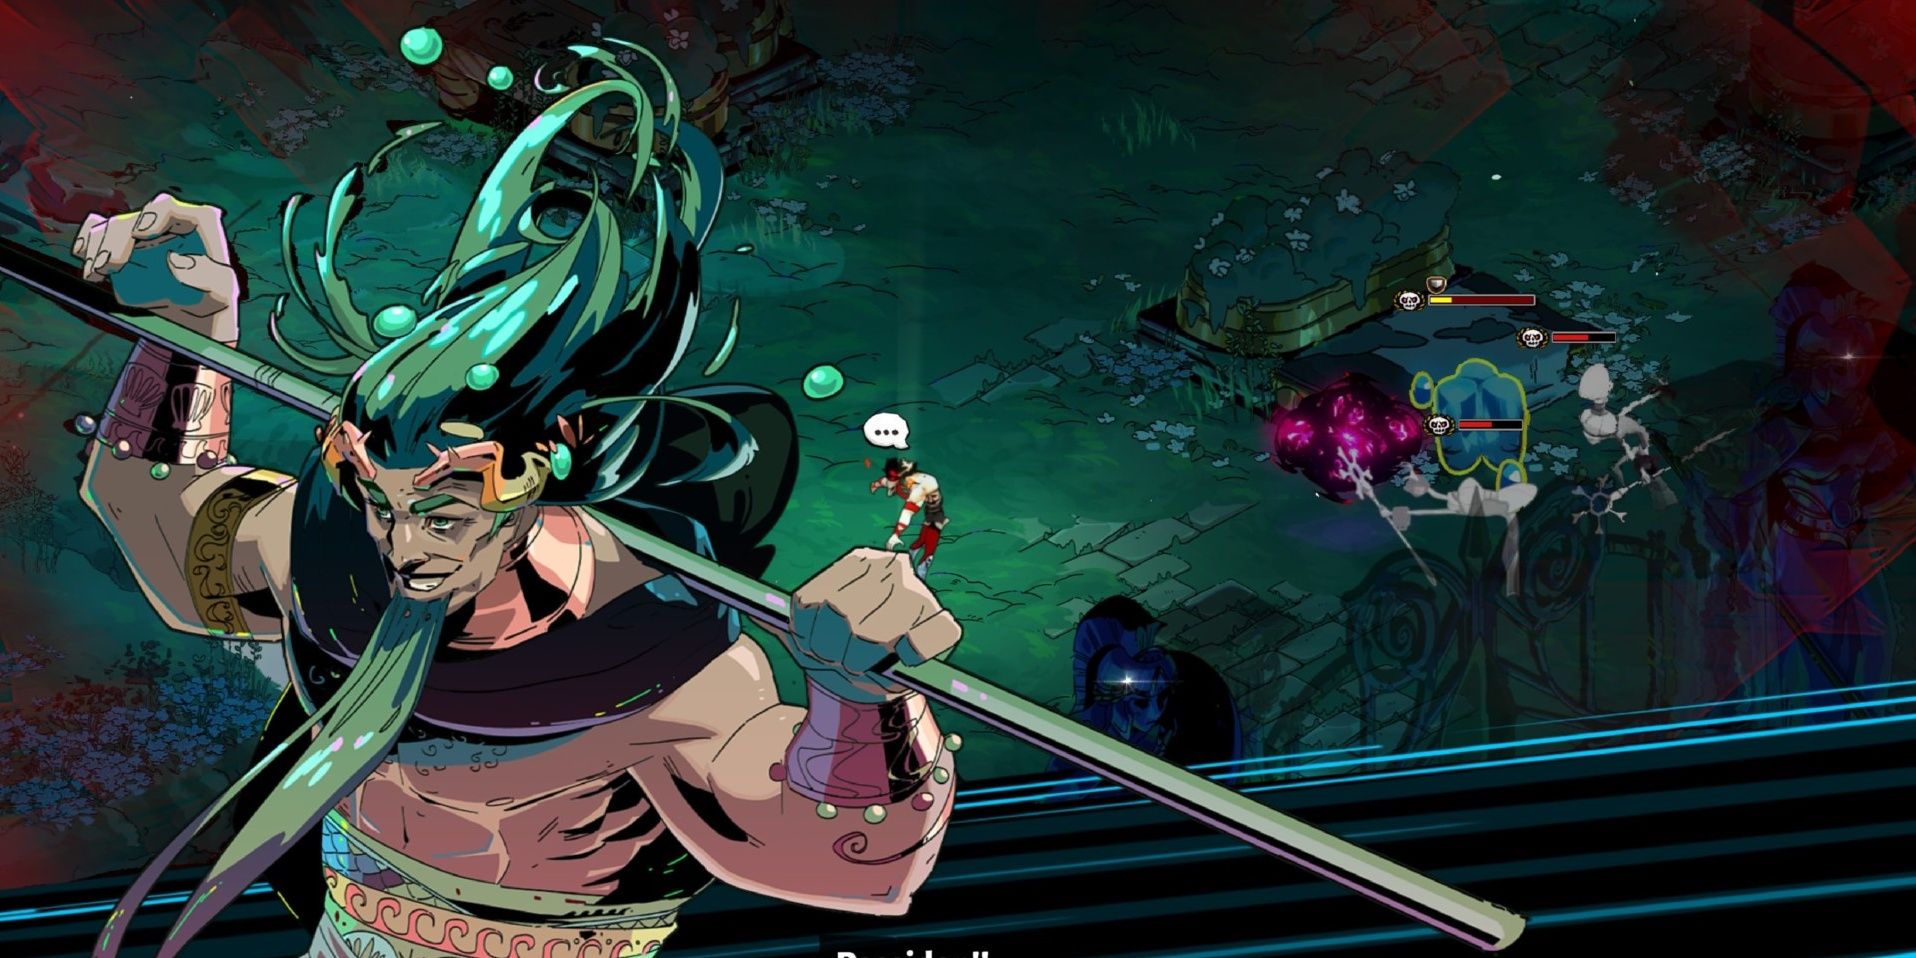 Poseidon from Hades character art being summoned by Zagreus to be used in combat